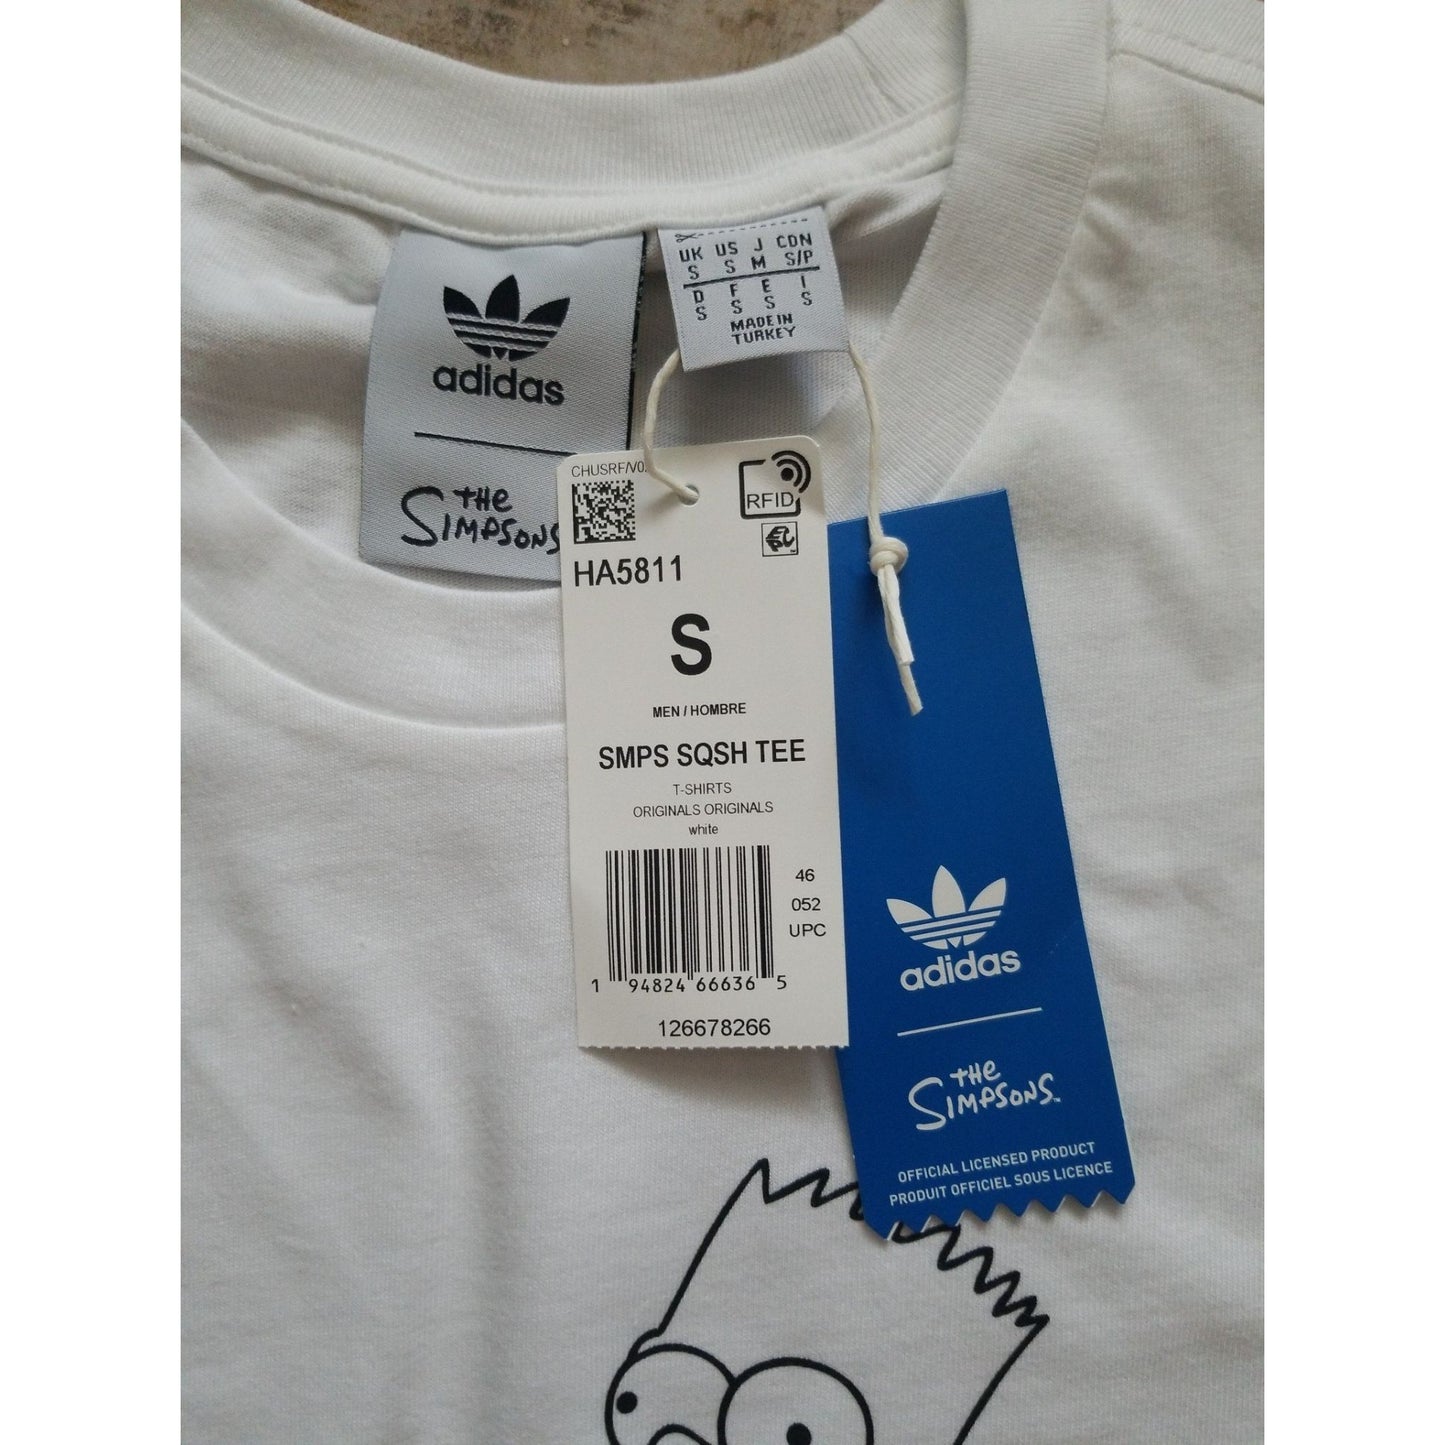 Adidas X The Bart Simpson Squishee Collaboration T-Shirt tags size